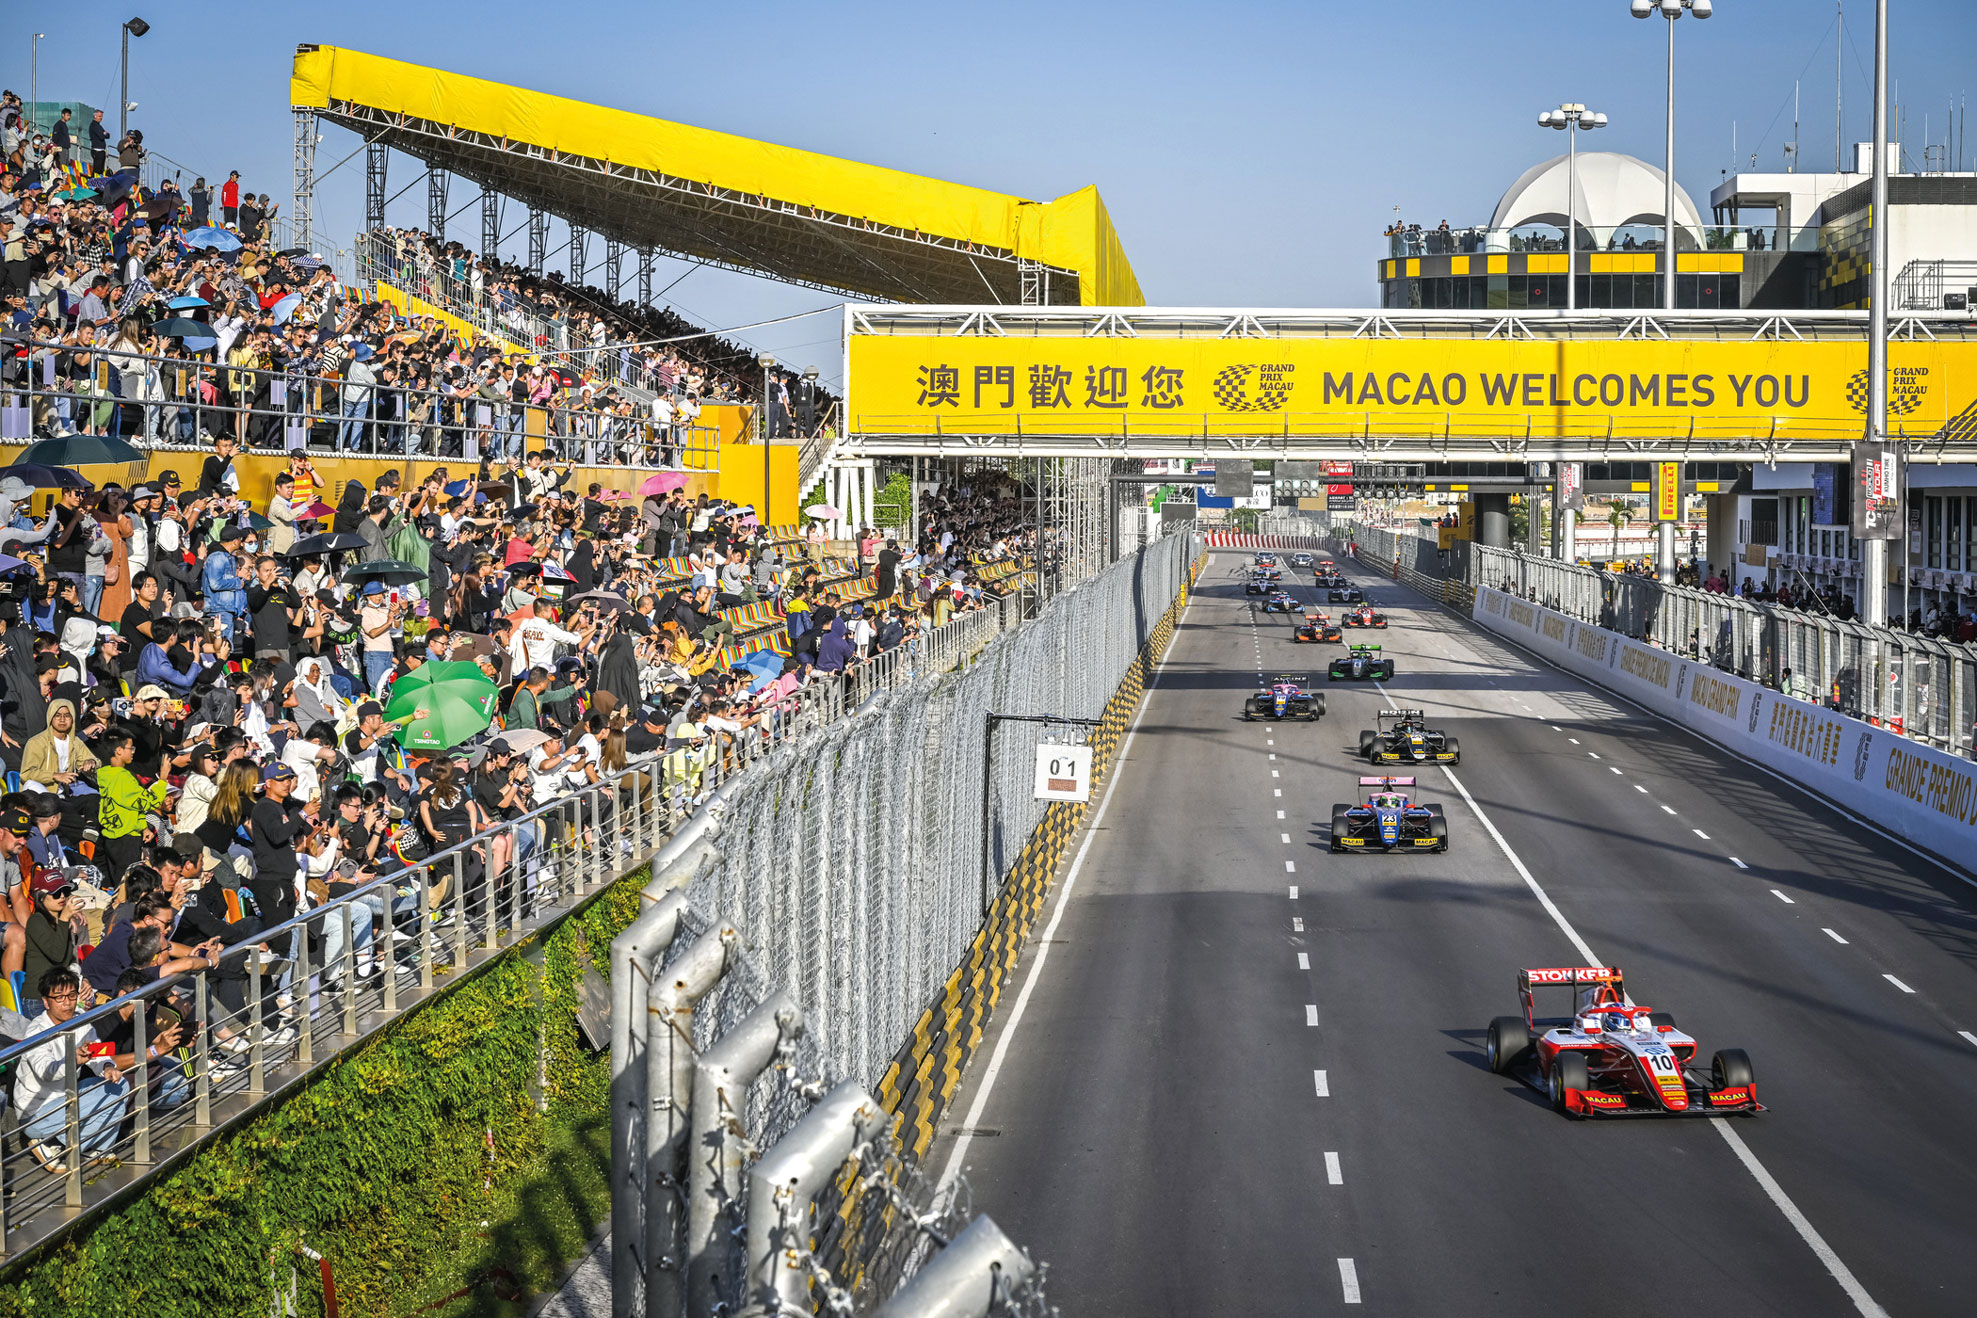 Spectators on the Grand Stand cheering on during the Formula 4 race